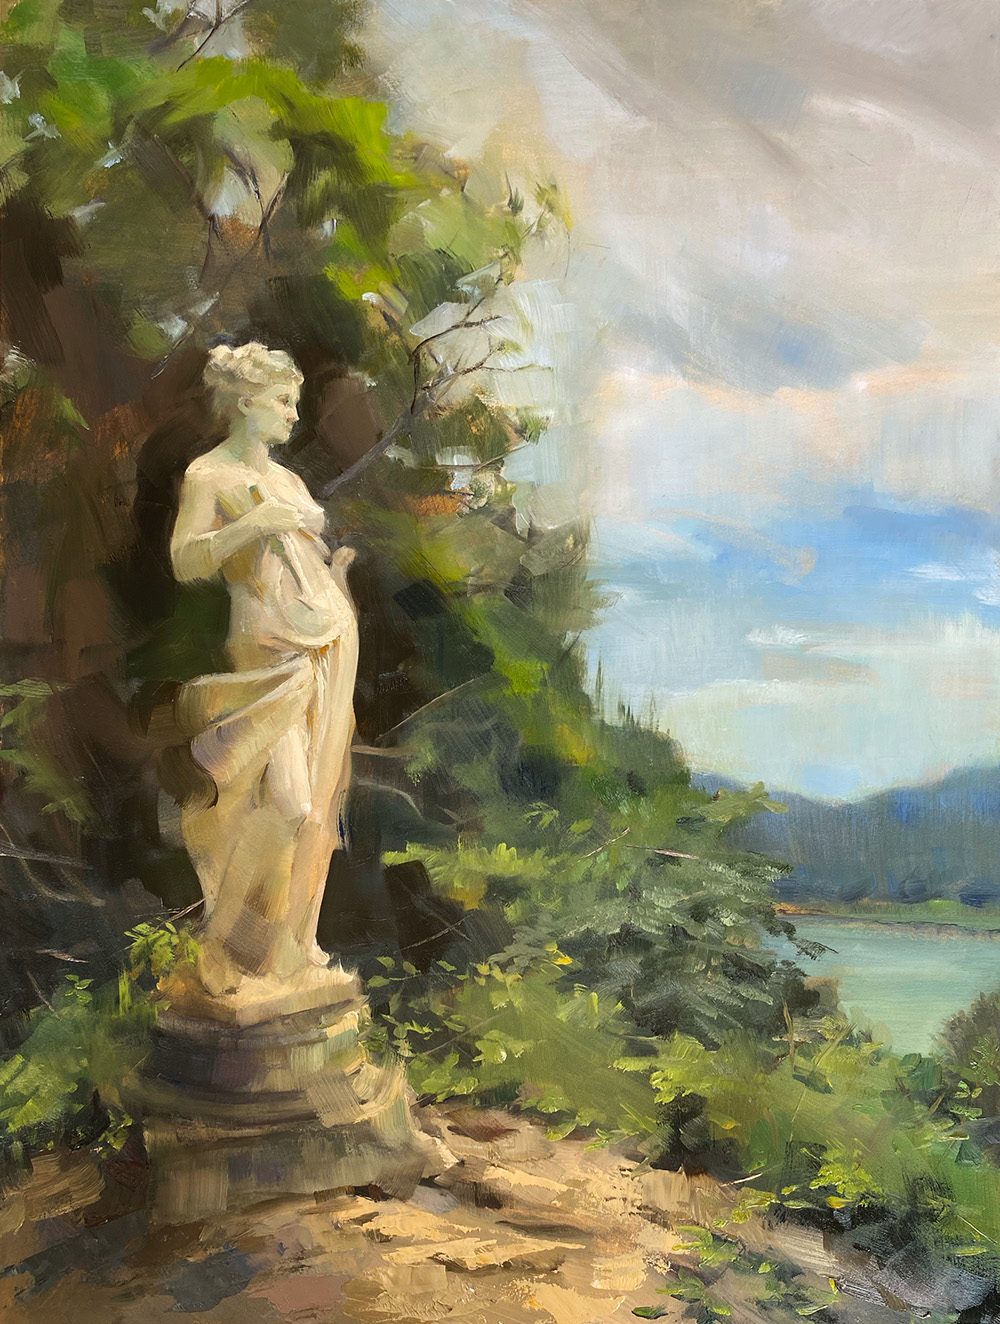 Landsacpe painting of a statue in front of a lake